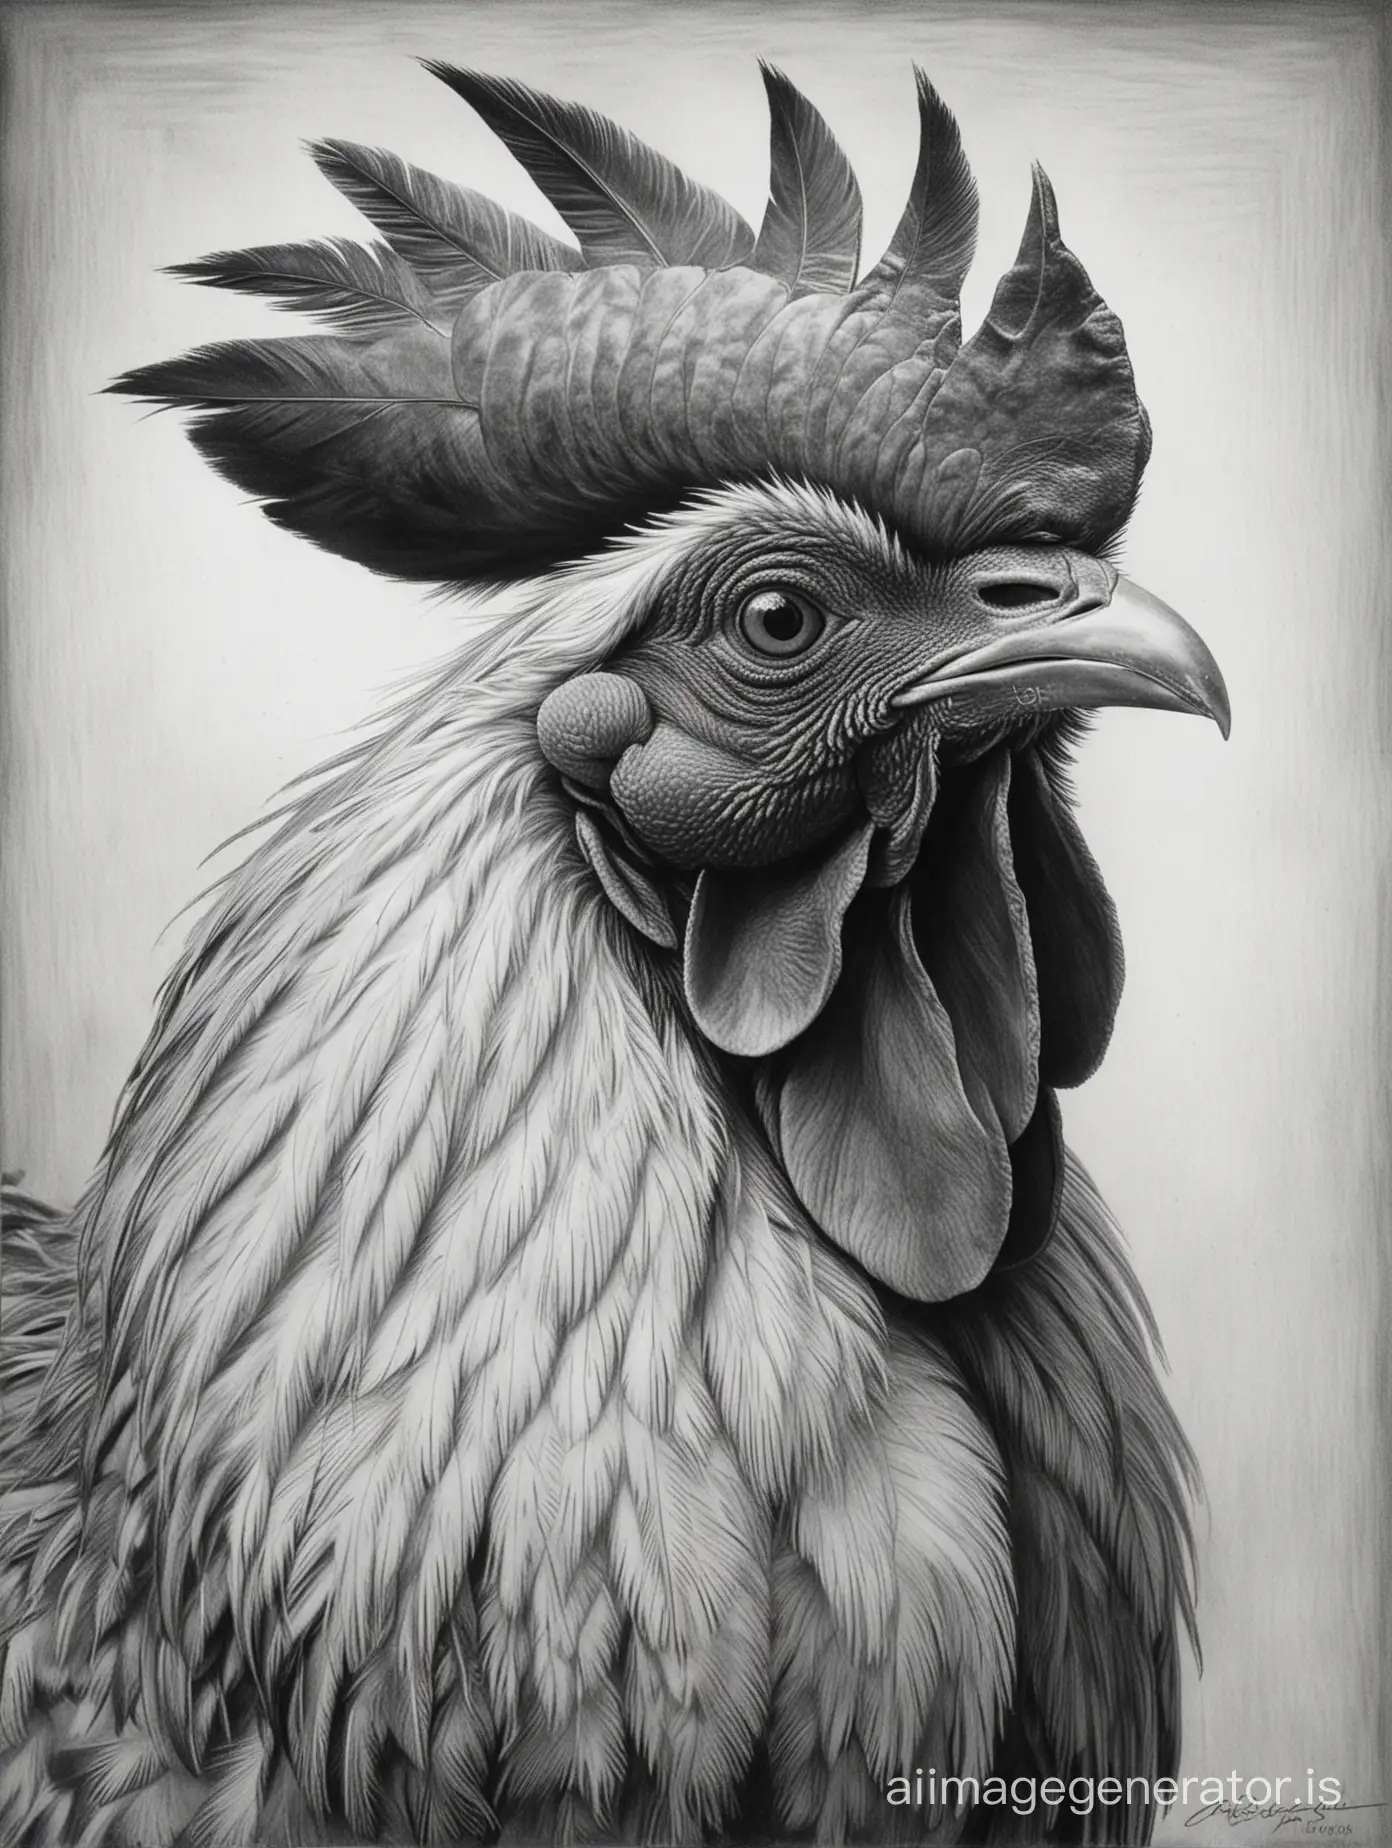 PicassoStyle-Monochrome-Artistic-Rendering-of-a-Welsummer-Rooster